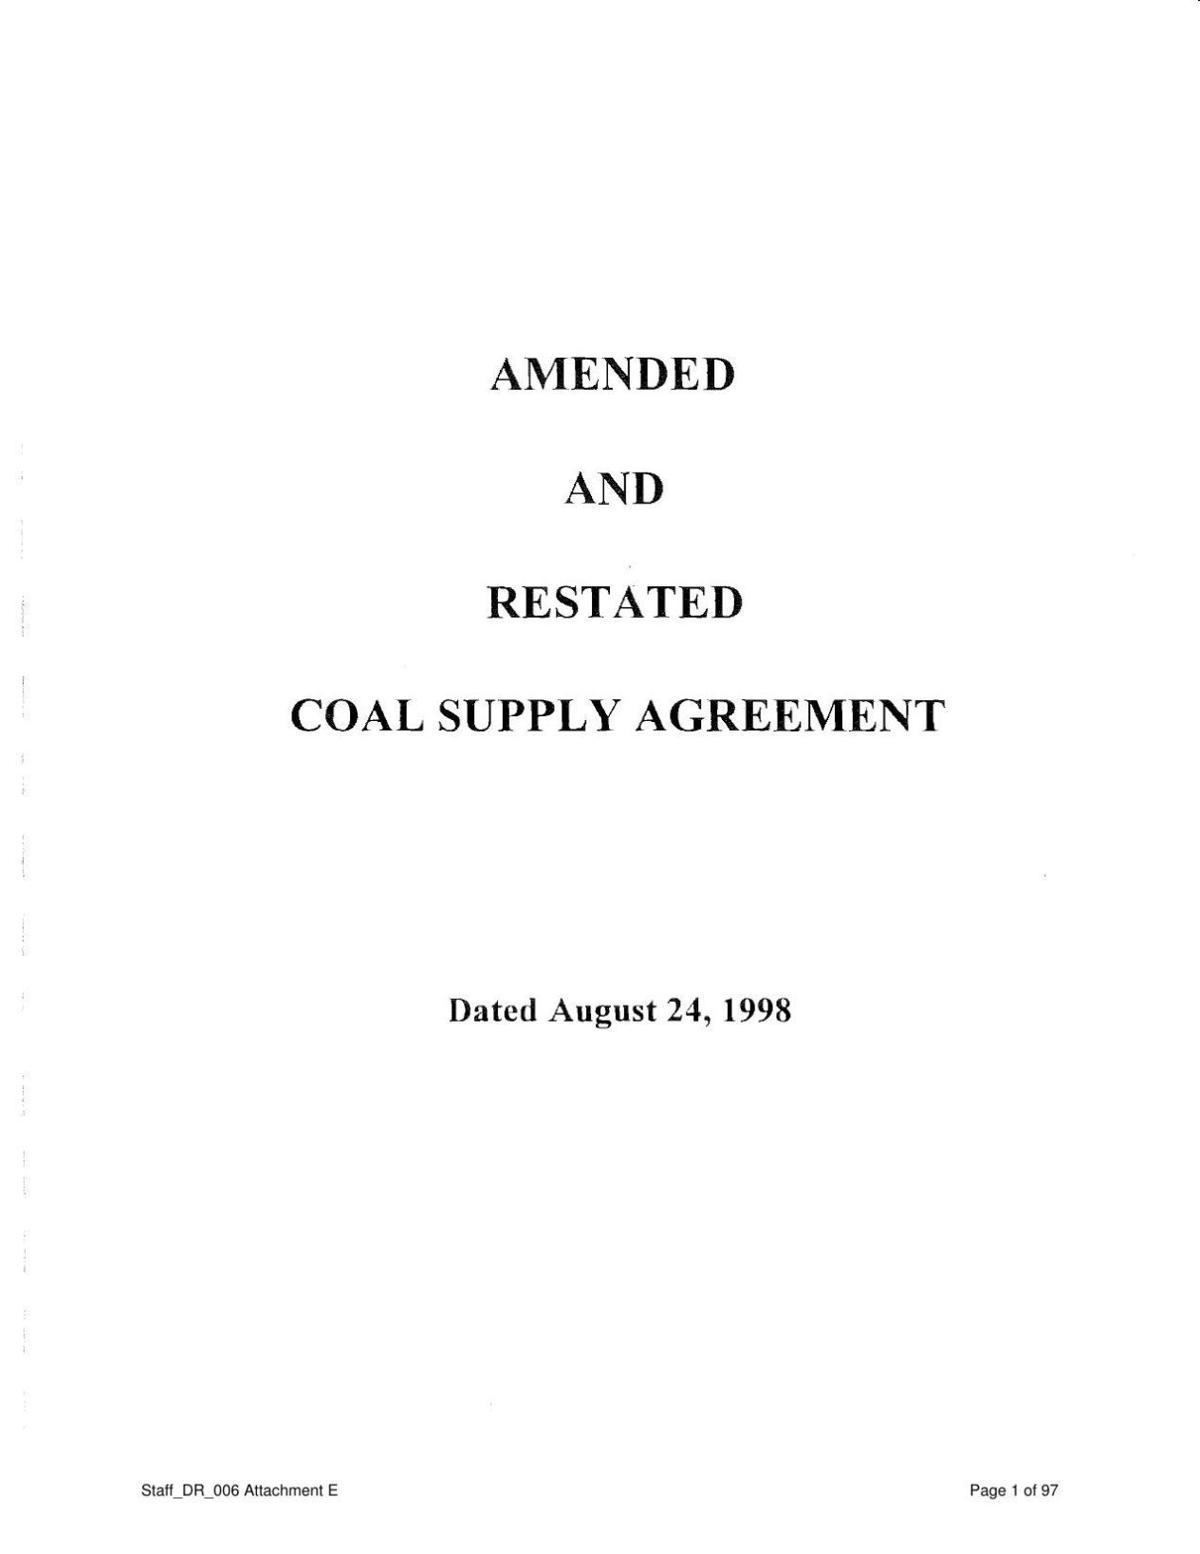 1998 coal contract for Colstrip Power Plant